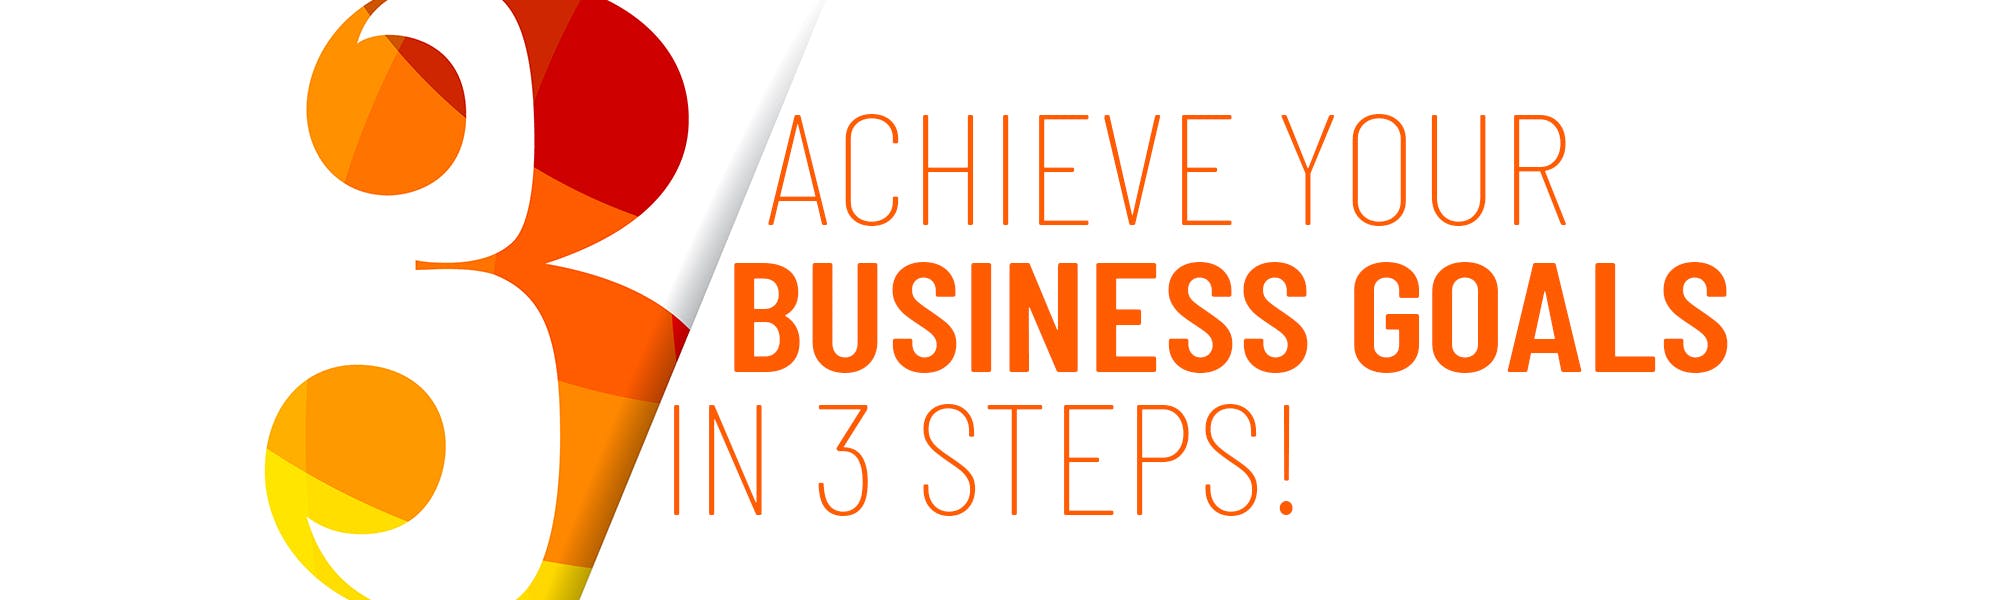 3 Steps To Achieve Your Business Goals